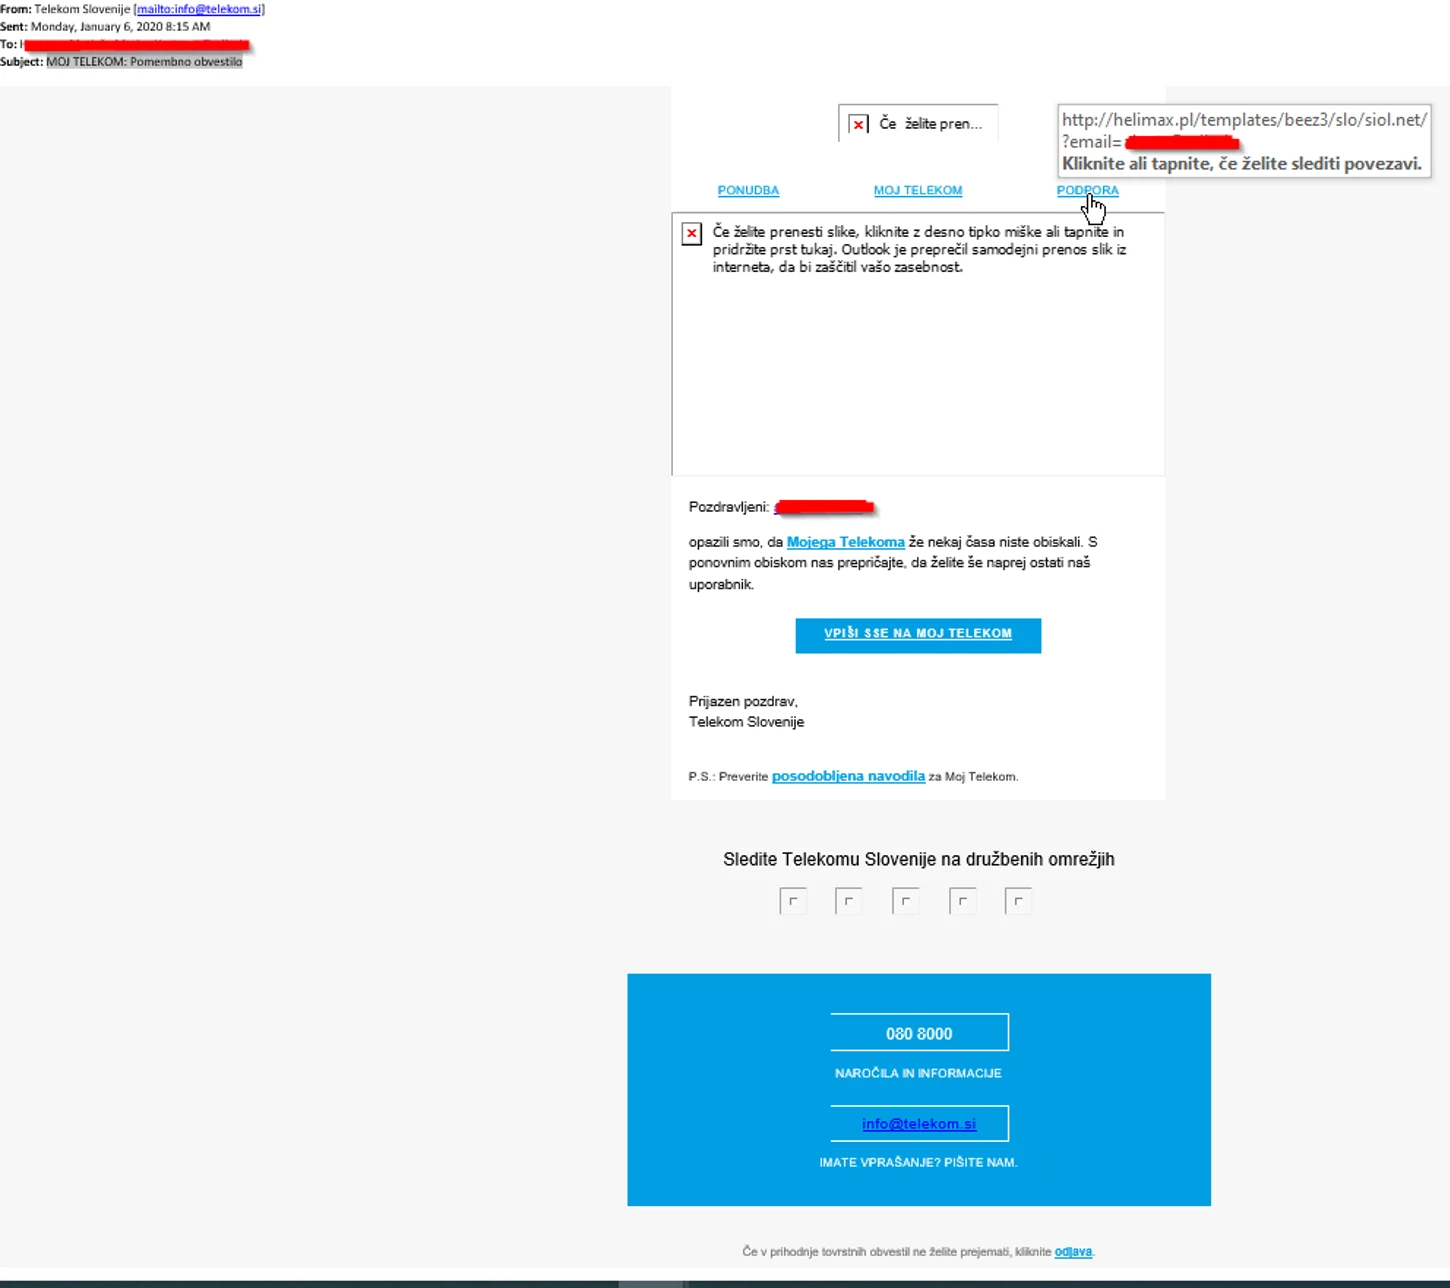 phishing-mail-helimax